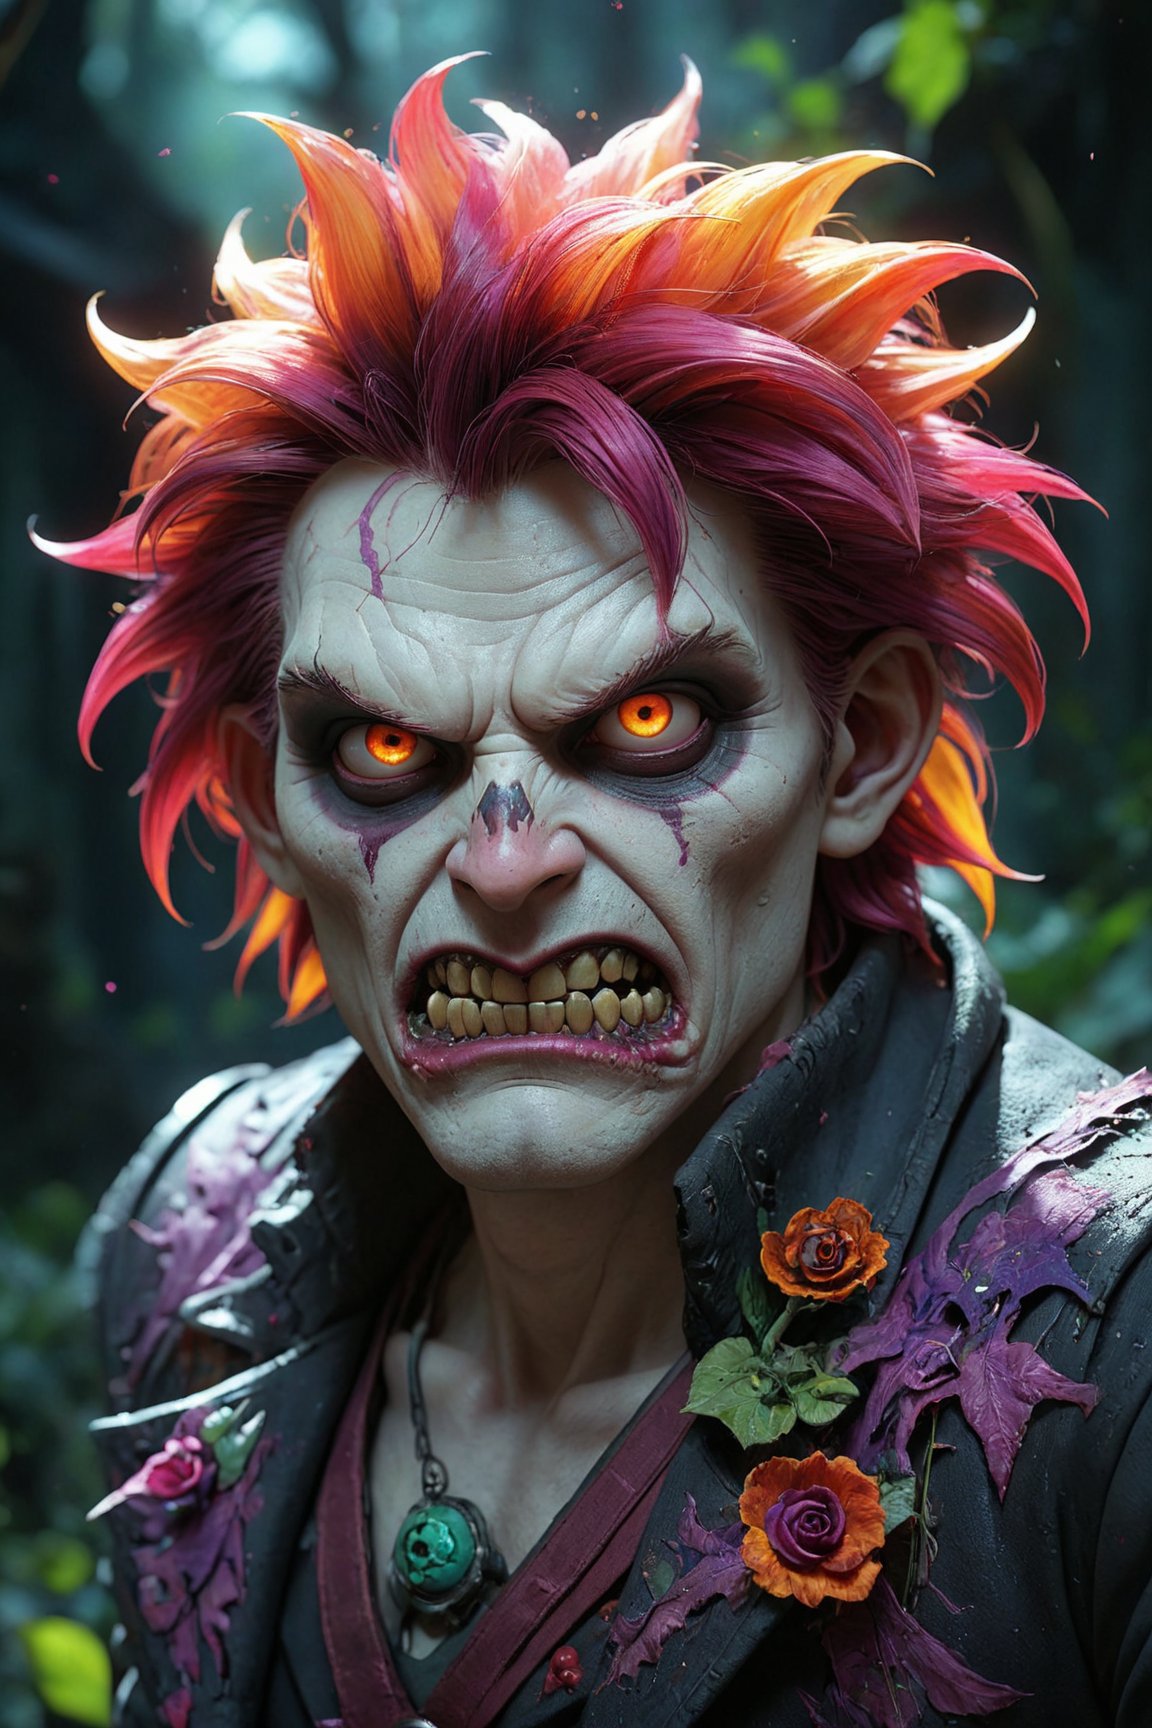 (best quality,8K,highres,masterpiece), ultra-detailed, (photorealistic, anime-style), illustration painting of a luminous and enchanting bad guy, undead/human-like creature with vibrant and colorful dark hair. The character strikes a dynamic pose in a fantastical realm environment filled with vivid hues and vibrant colors, illuminated by fantastical light particles. The mid shot composition and rule of thirds depth of field showcase intricate details, emphasizing the creature's grandeur and awe. The scene is cinematic, featuring double exposure effects and strong outlines, creating a stunning visual masterpiece bursting with lively and energetic colors.